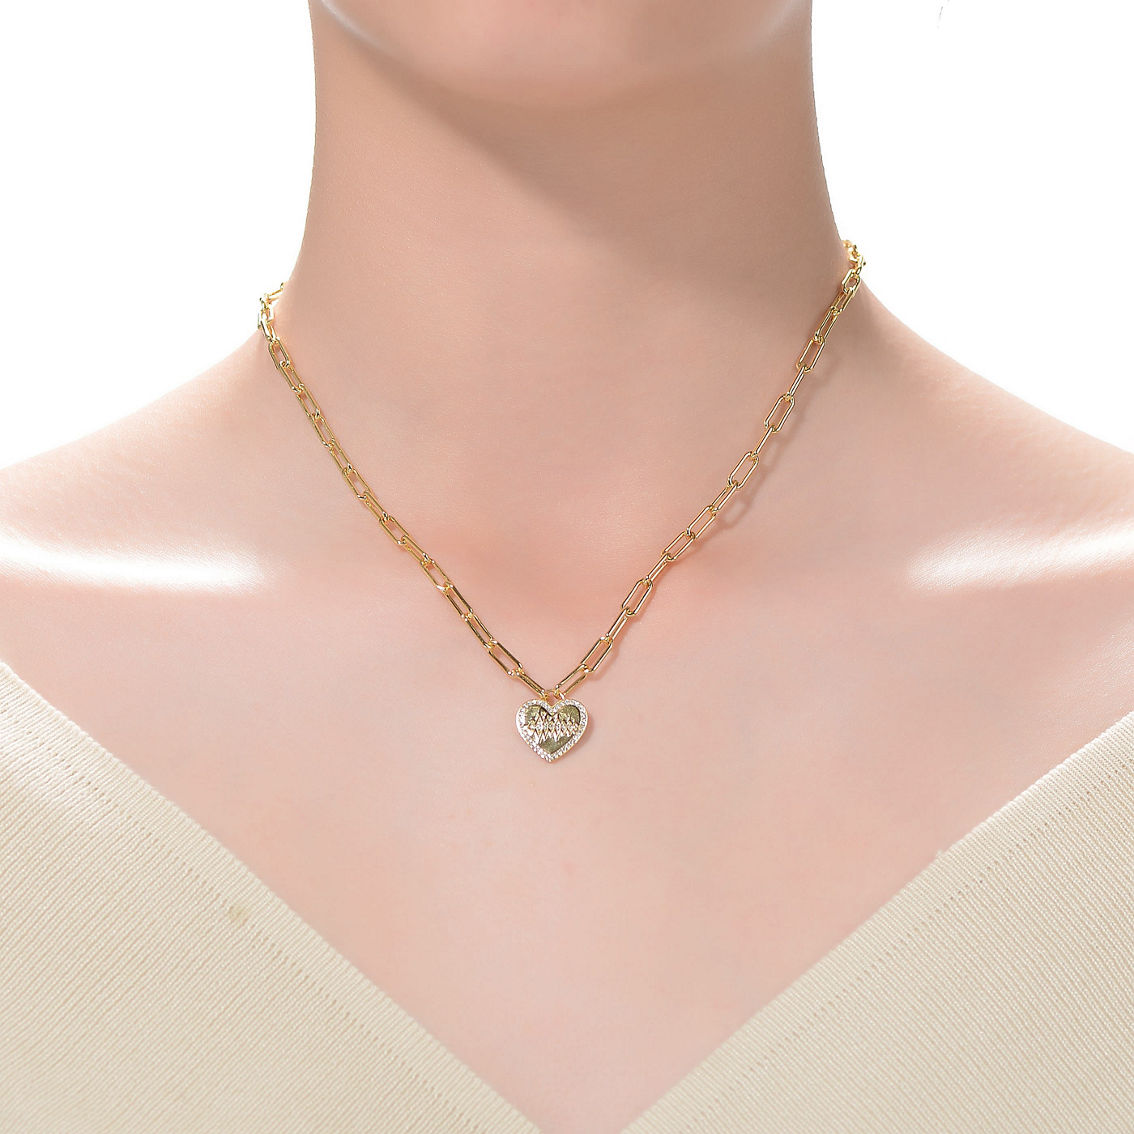 14K Gold Plated Cubic Zirconia Charm Necklace - Image 3 of 3